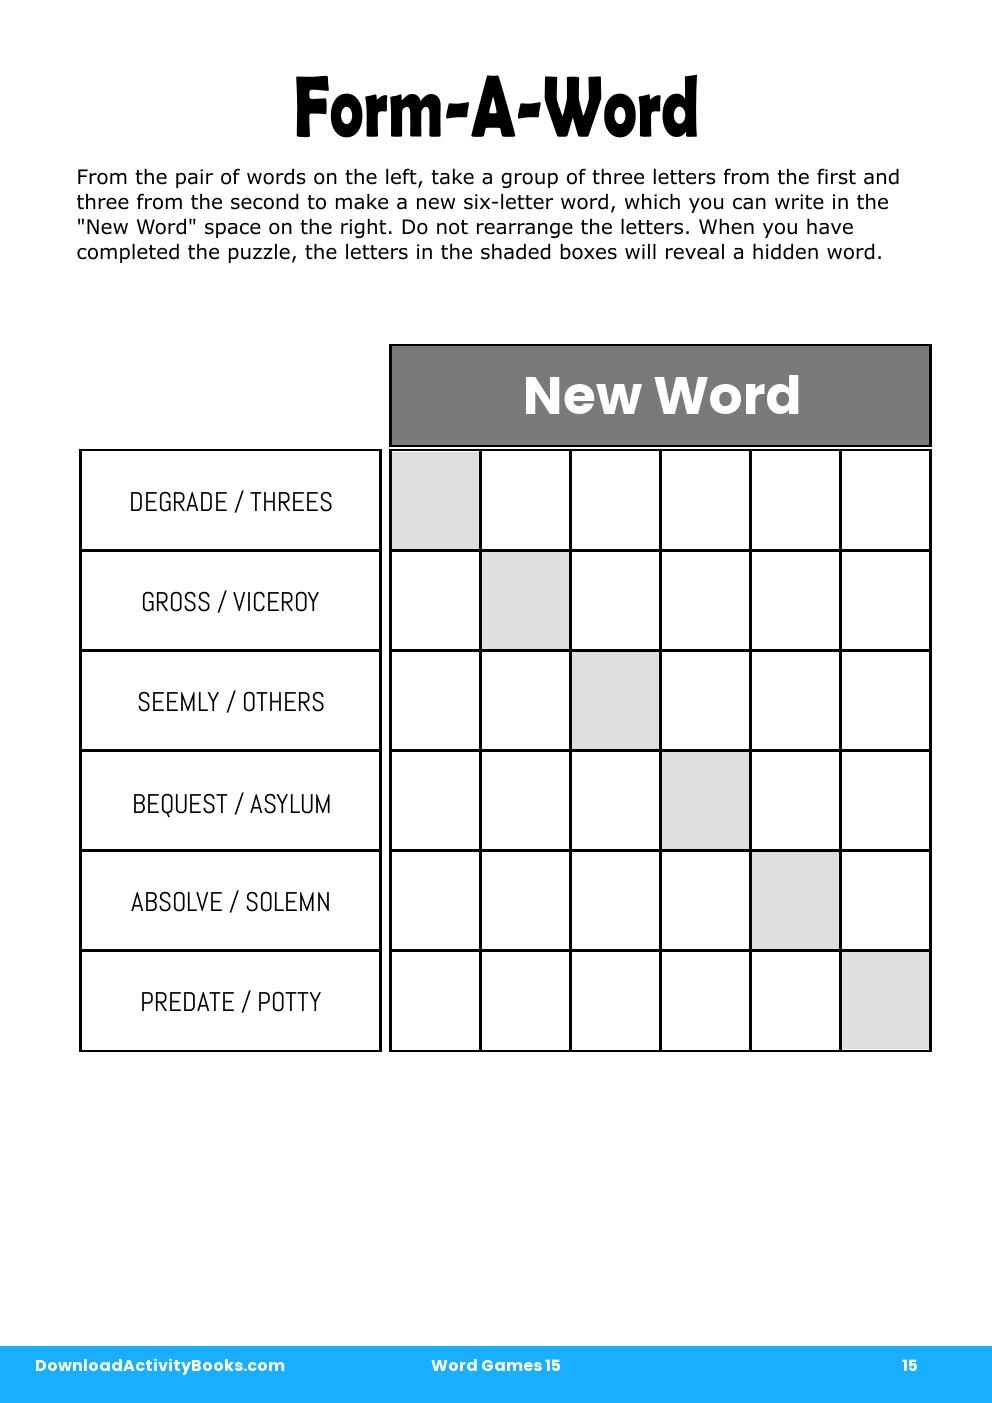 Form-A-Word in Word Games 15